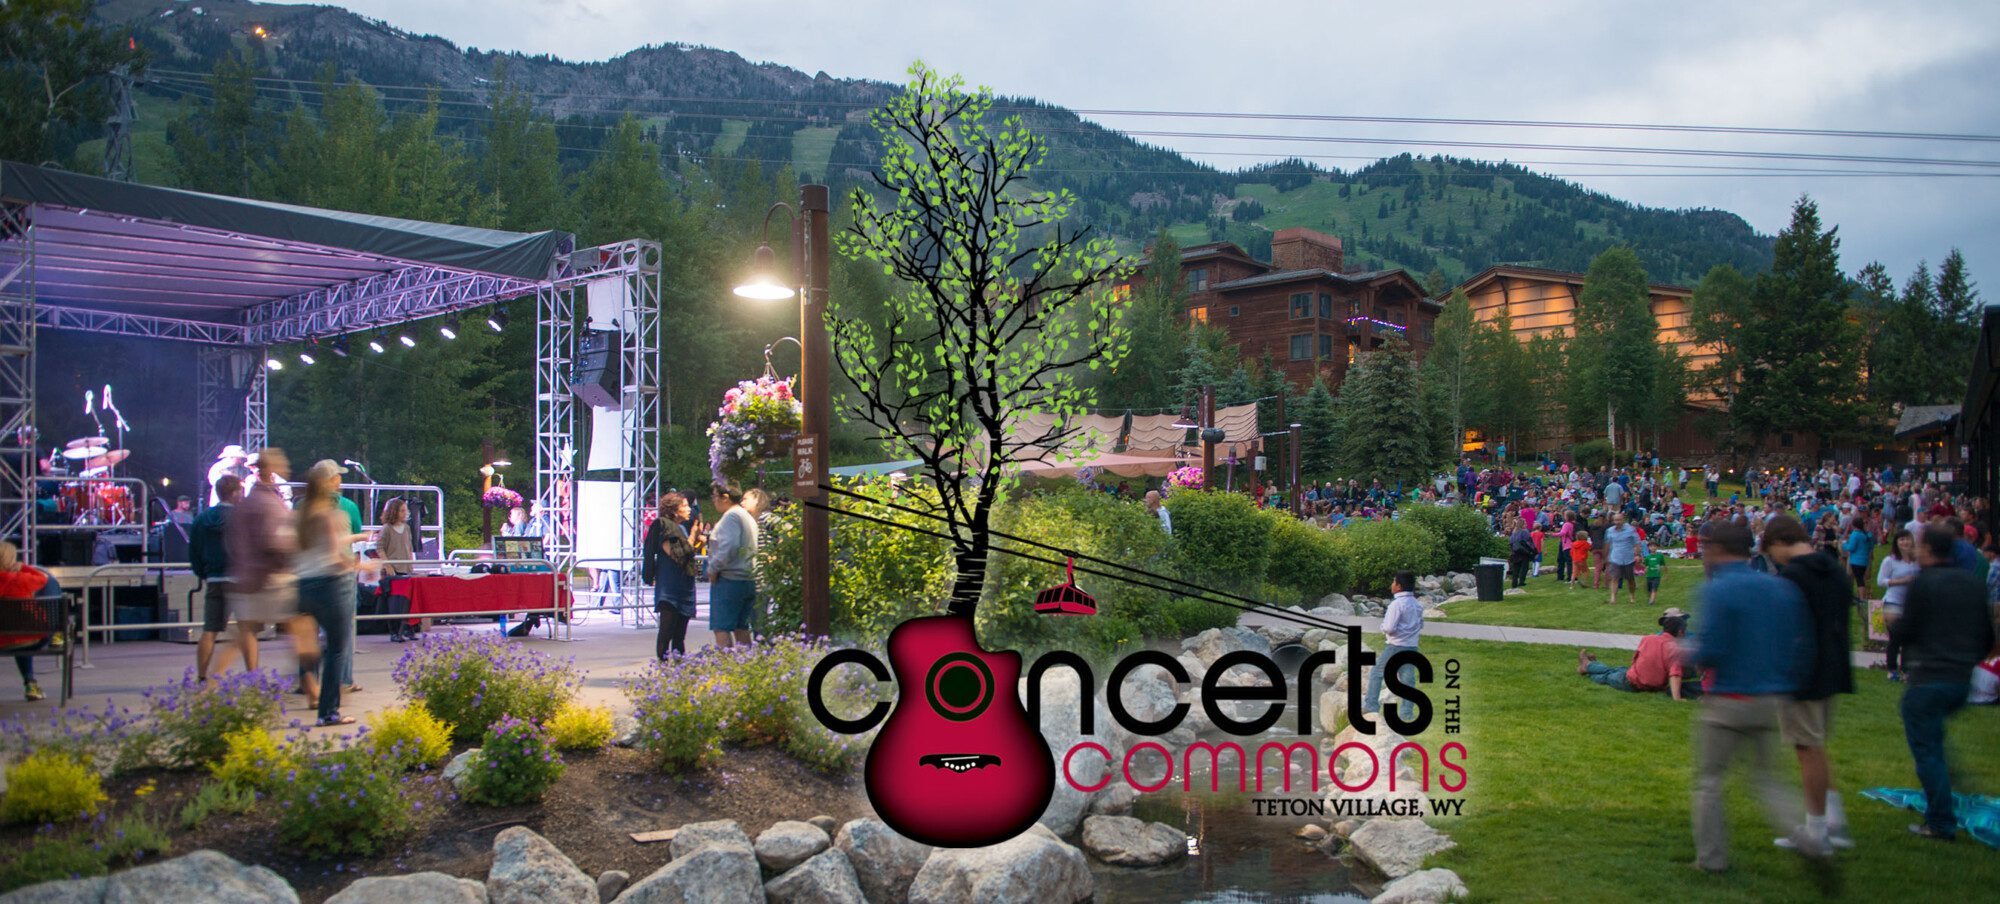 Concerts On The Commons